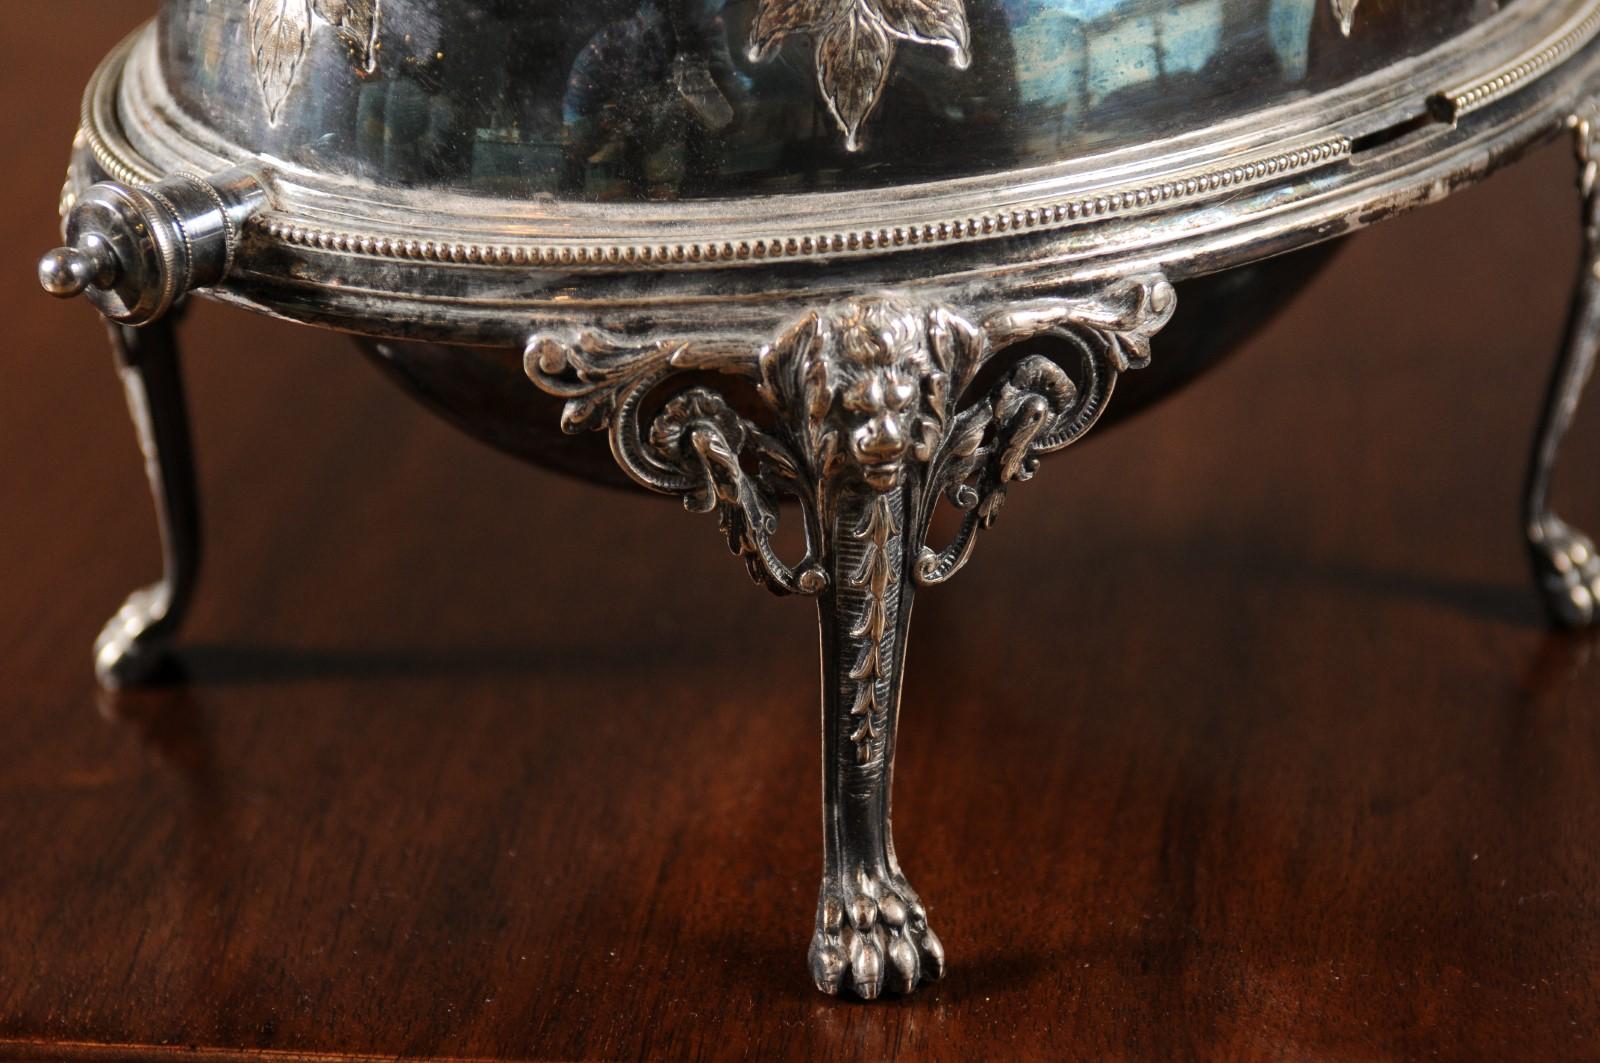 English 19th Century Silver Plated Asparagus Dish Warmer with Cabriole Legs For Sale 5